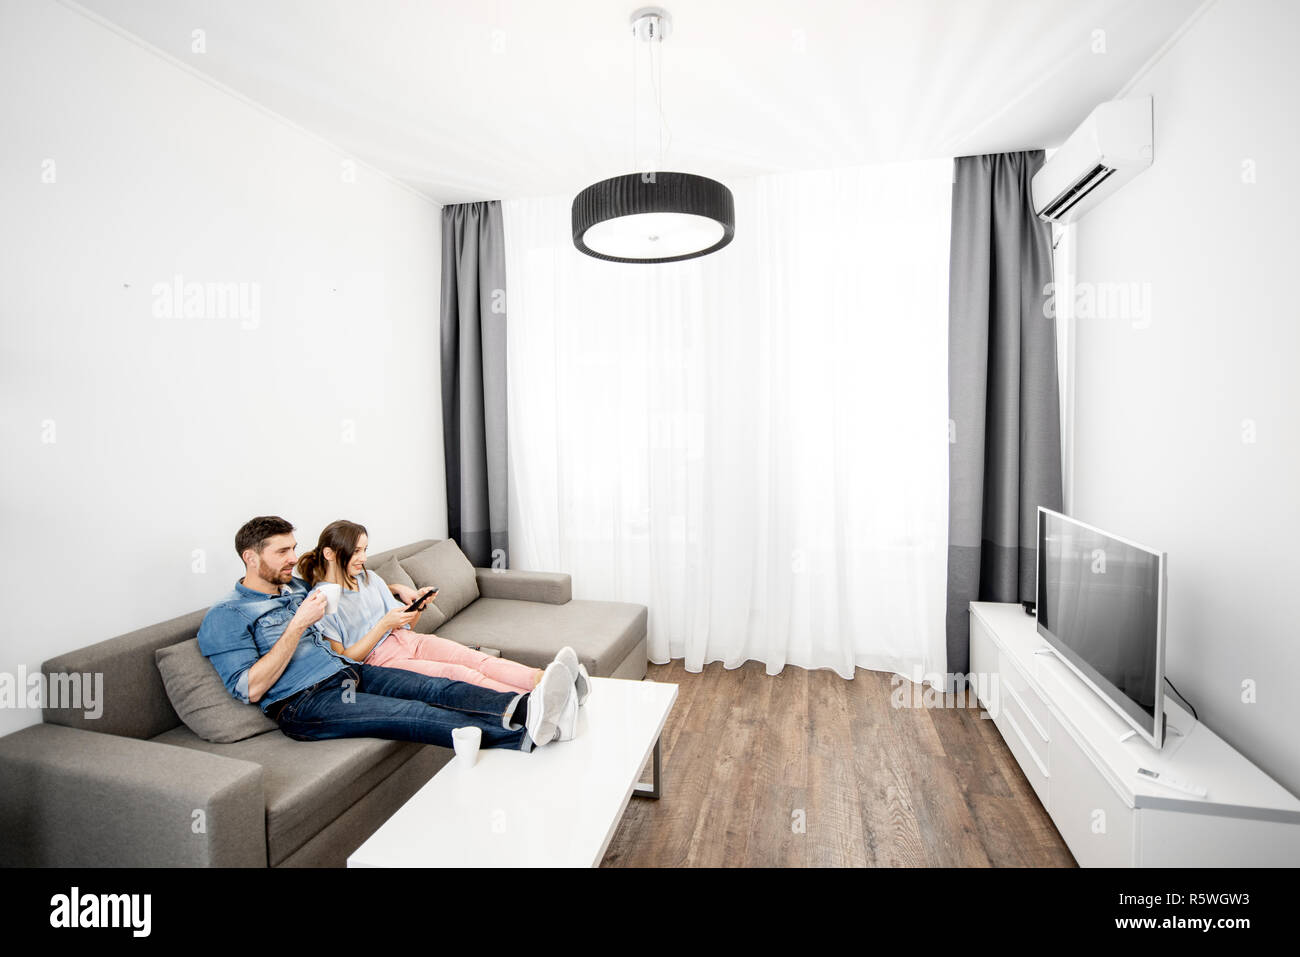 Young couple sitting together on the couch and watching TV at home. Wide interior view Stock Photo